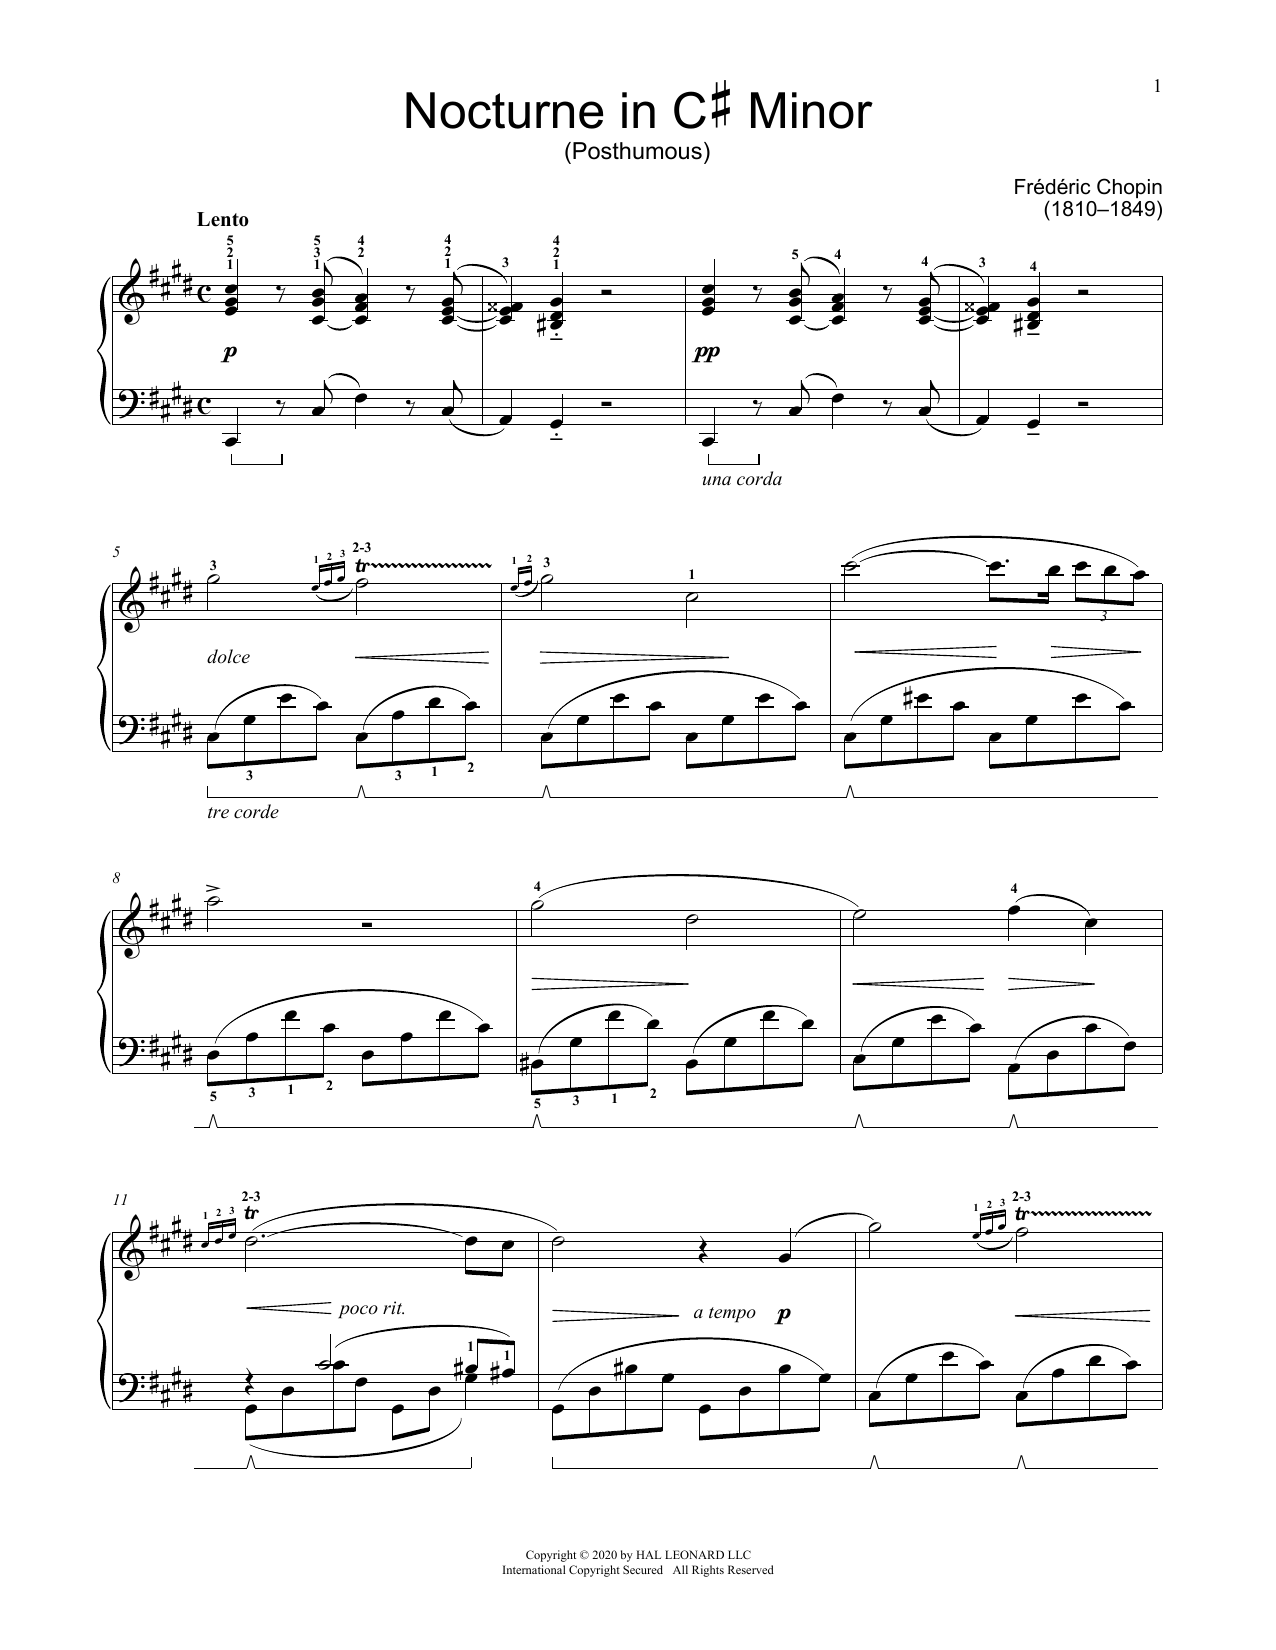 Frederic Chopin Nocturne In C-Sharp Minor, KK. Anh. Ia, No. 6 sheet music notes printable PDF score